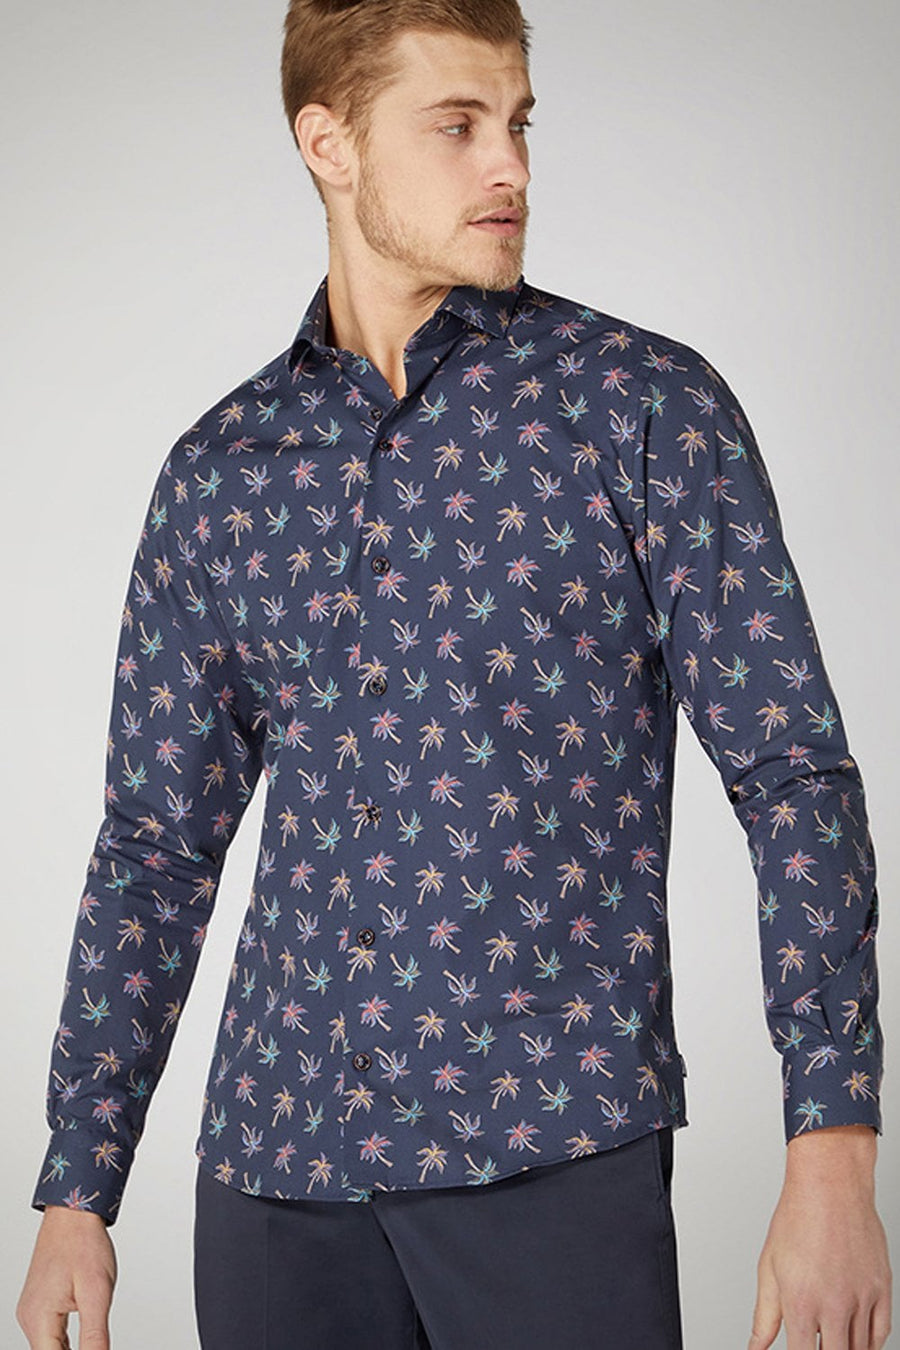 Buy the Remus Uomo Palm Tree Design L/S Shirt in Navy at Intro. Spend £50 for free UK delivery. Official stockists. We ship worldwide.